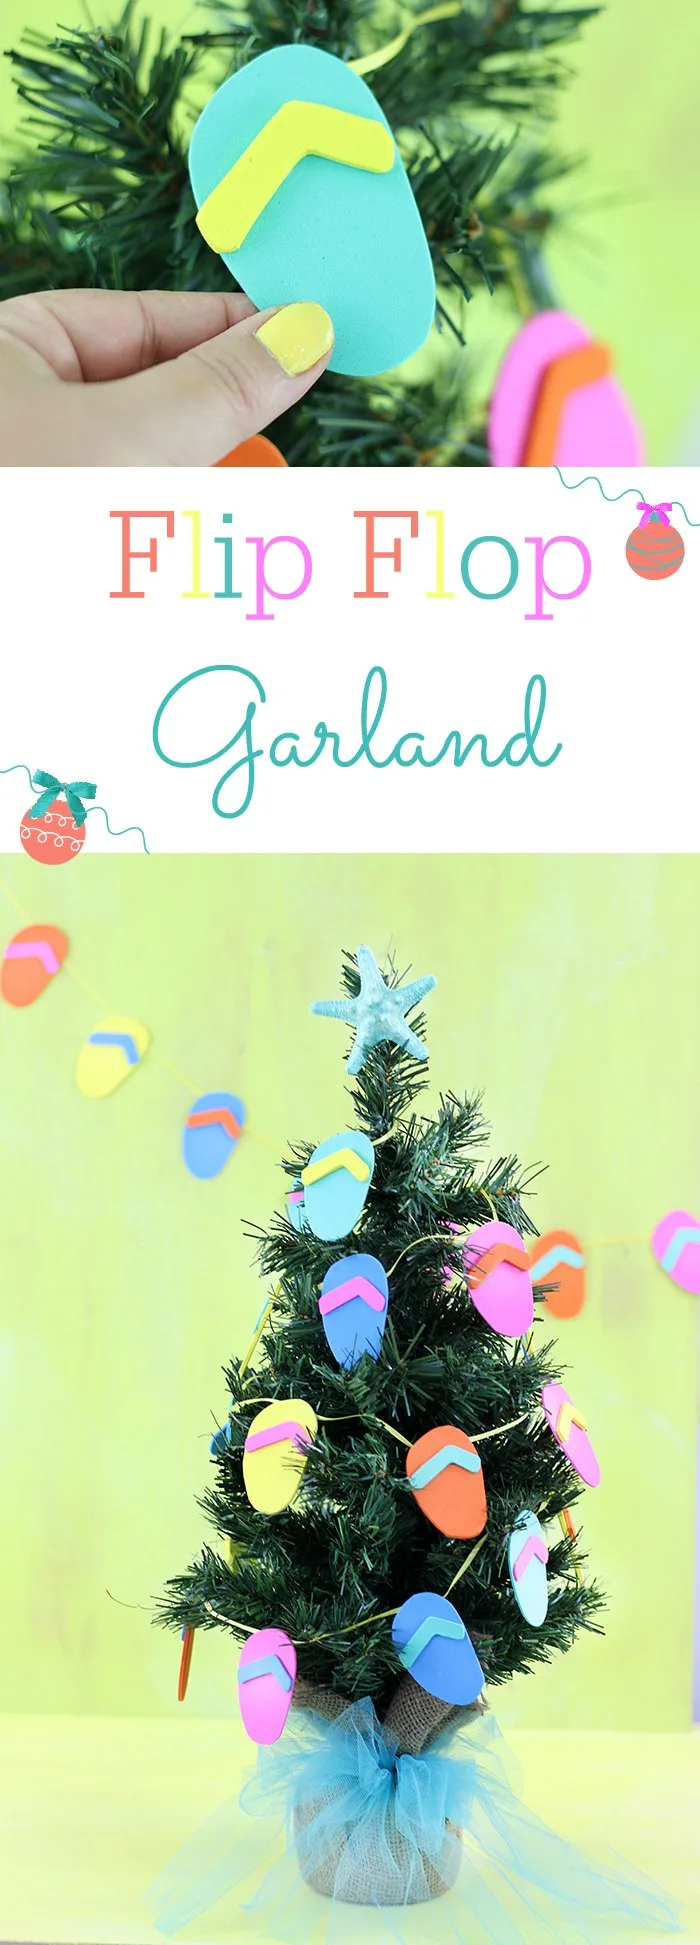 DIY Flip Flop Garland. Christmas in July? Make this fun craft that plays on a warm weather Christmas.